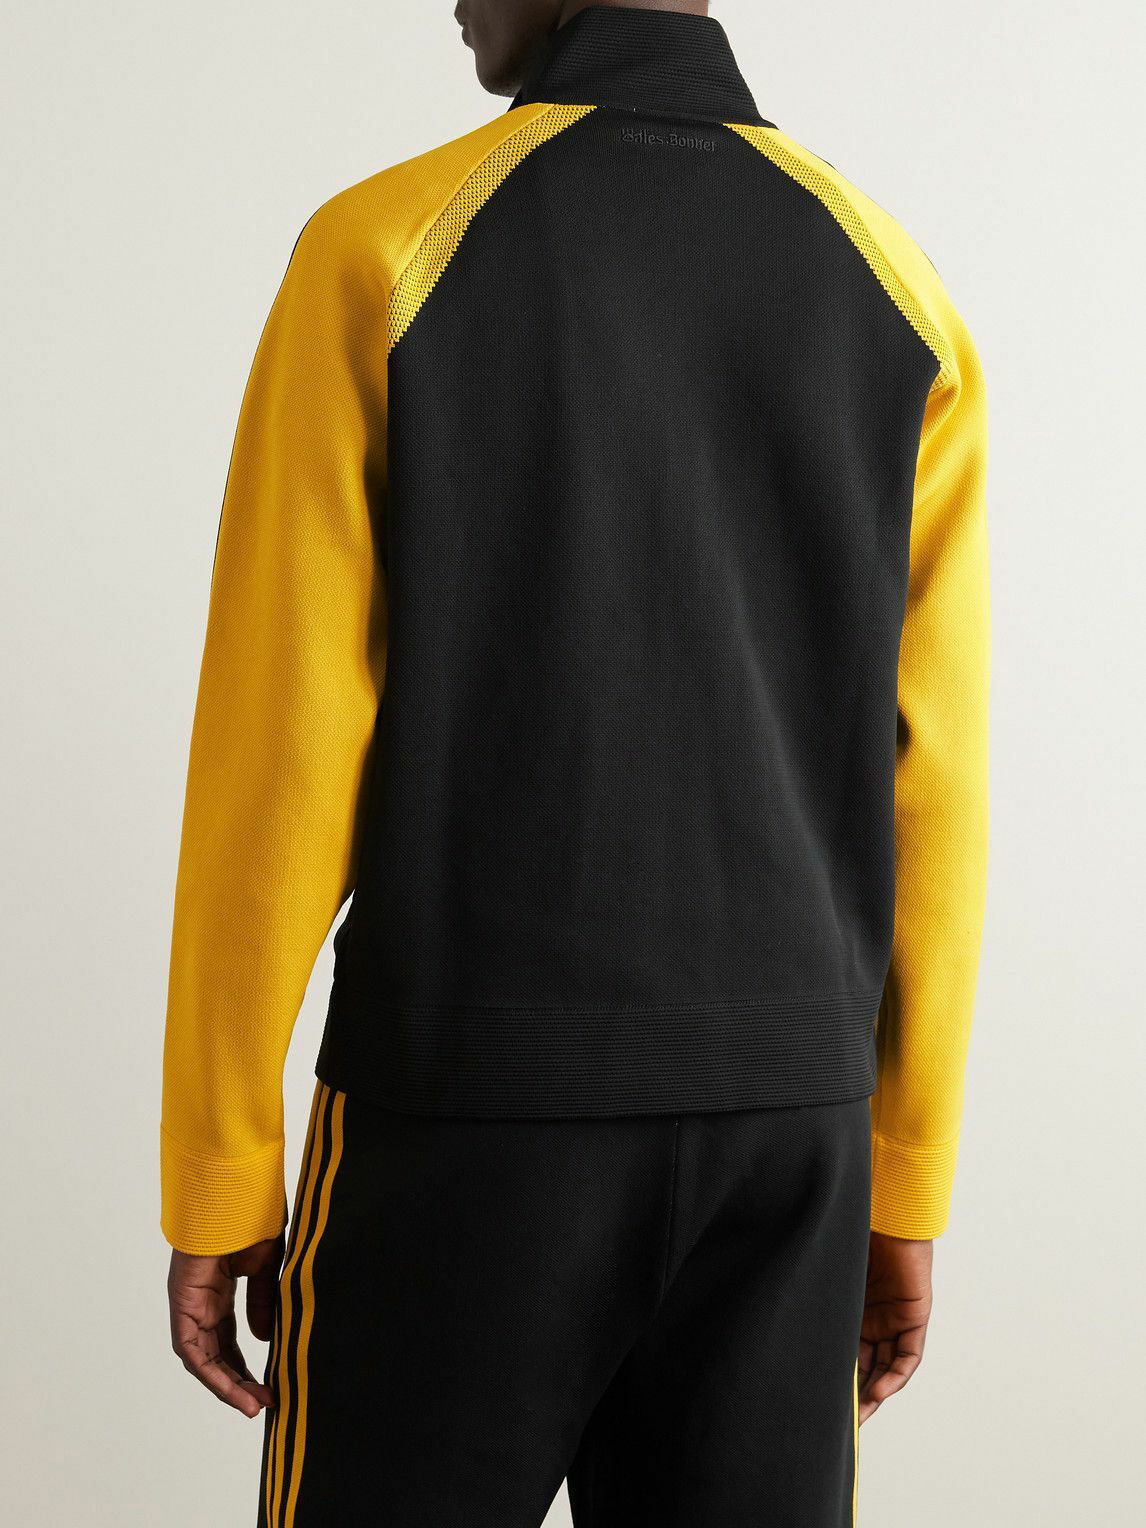 + Wales Bonner mesh-trimmed recycled stretch-knit track jacket